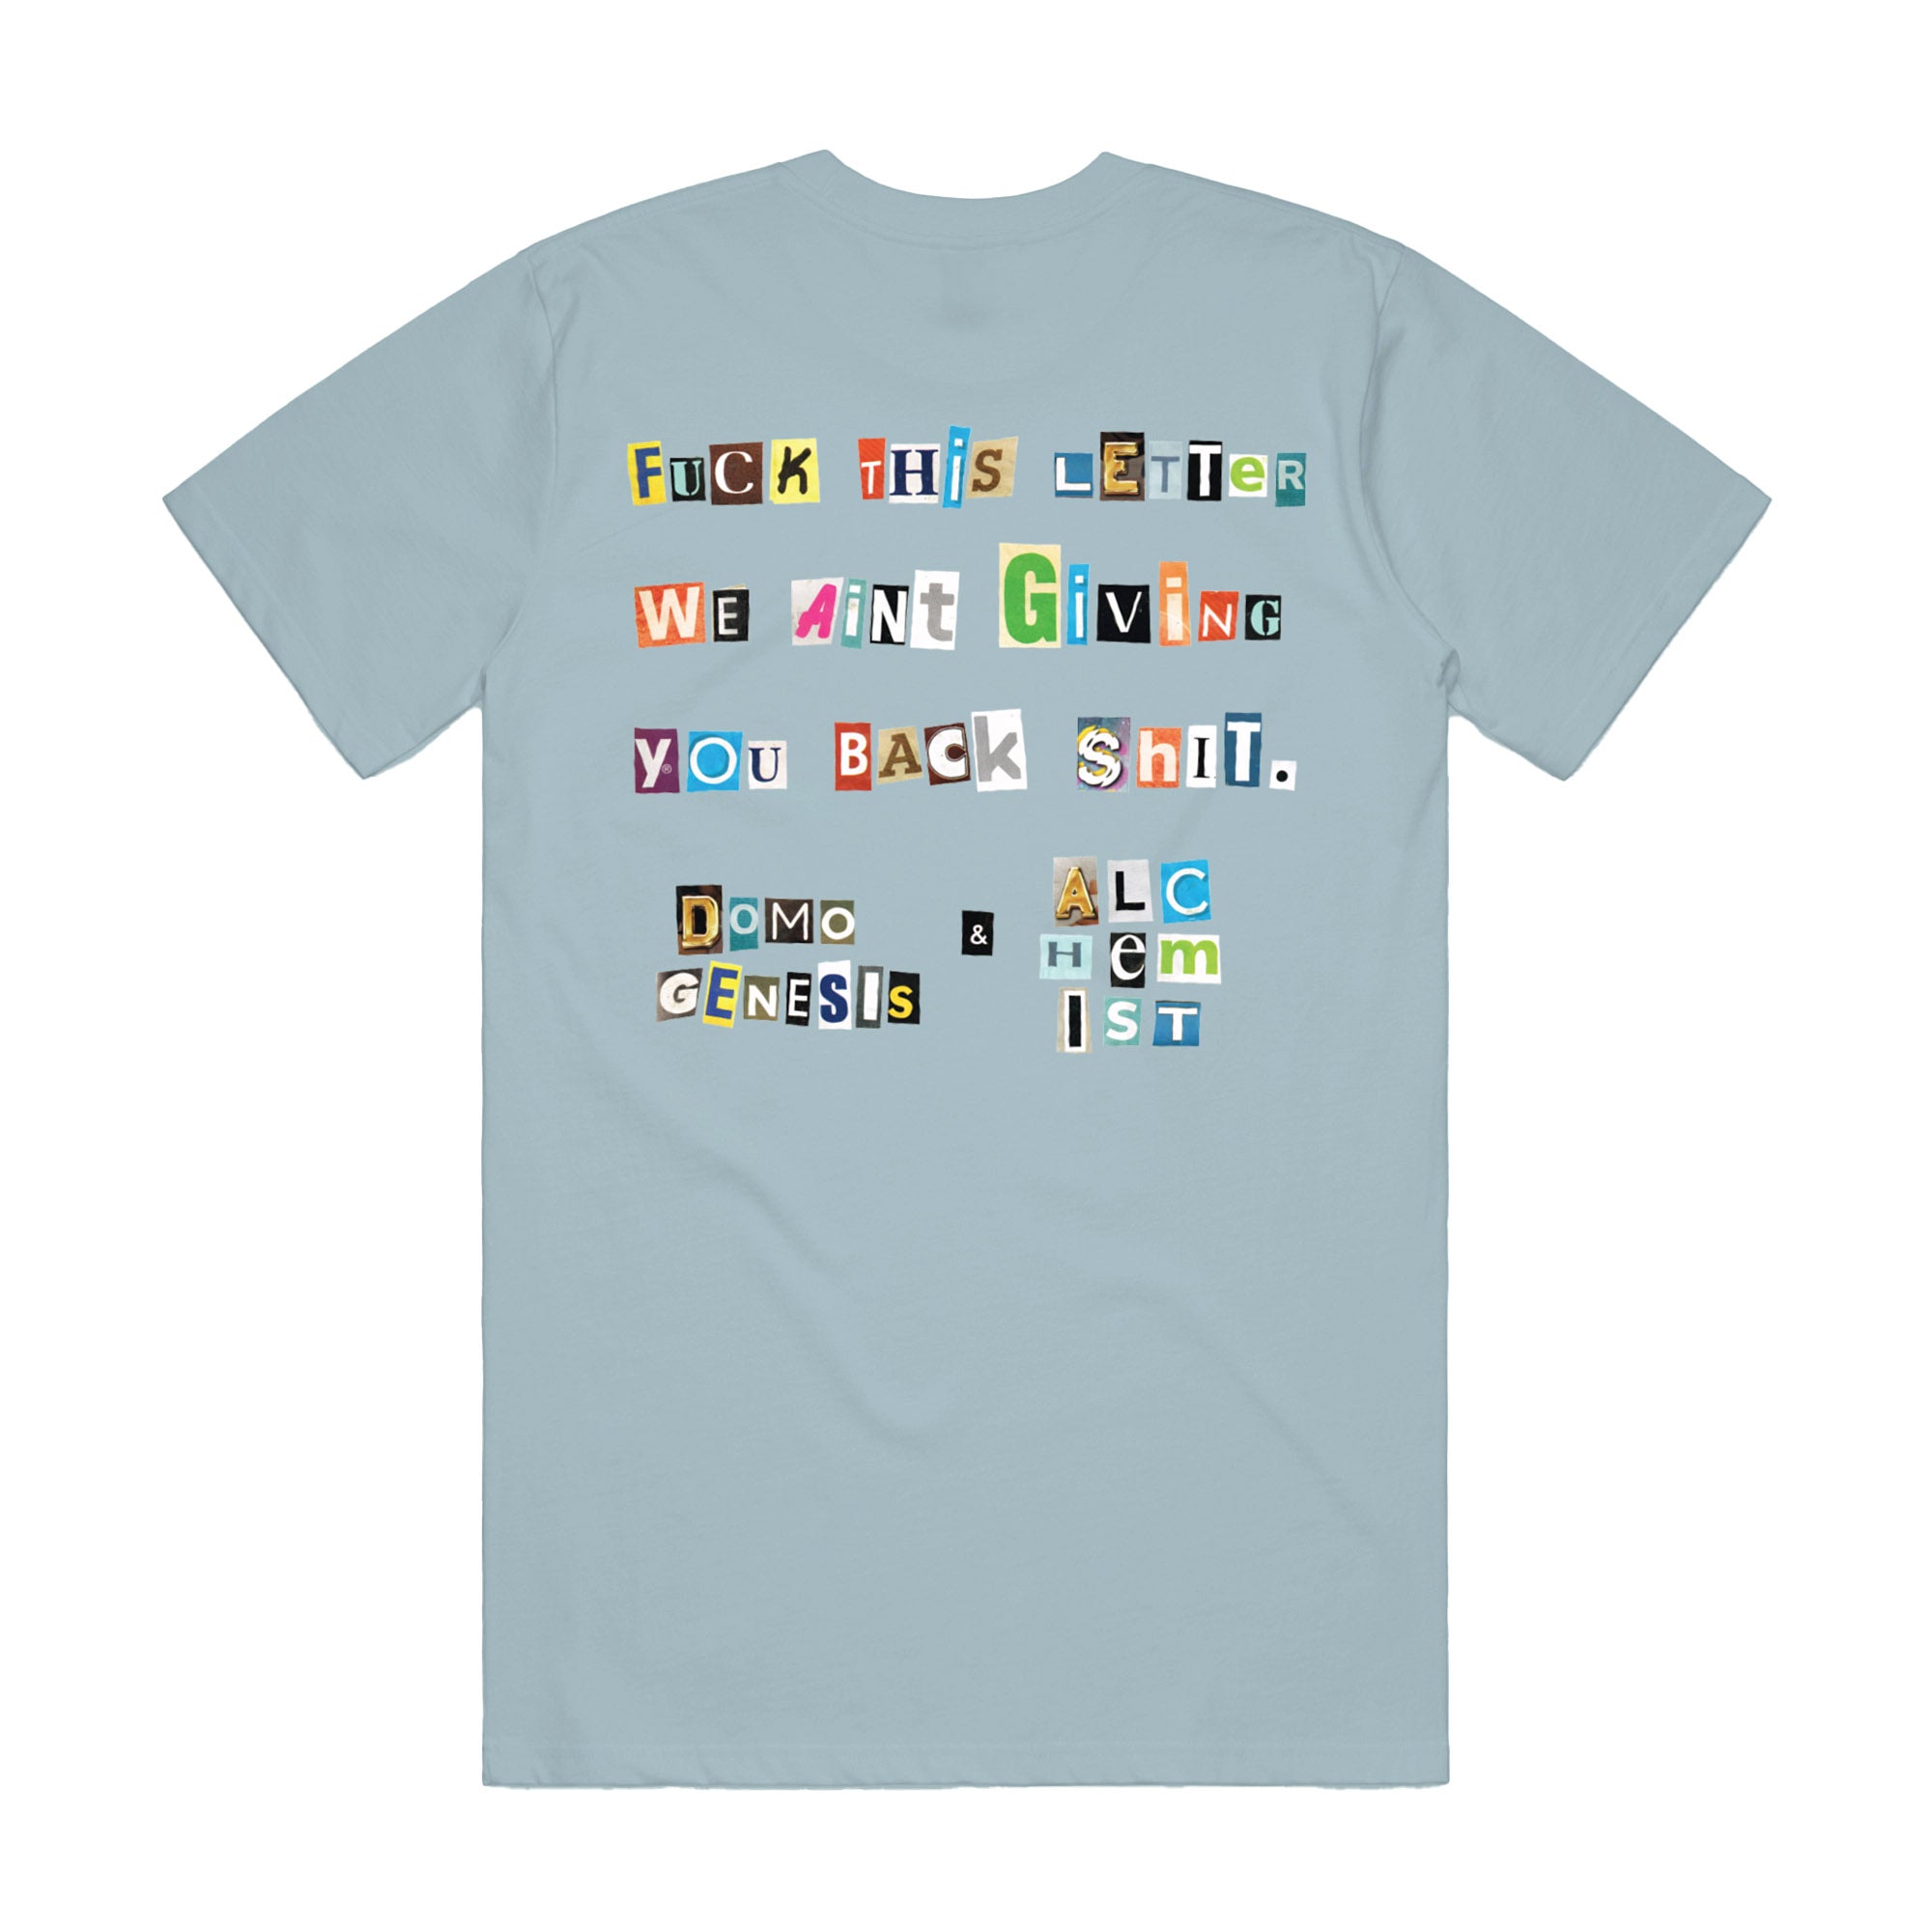 Ransom Note (Blue T-Shirt)